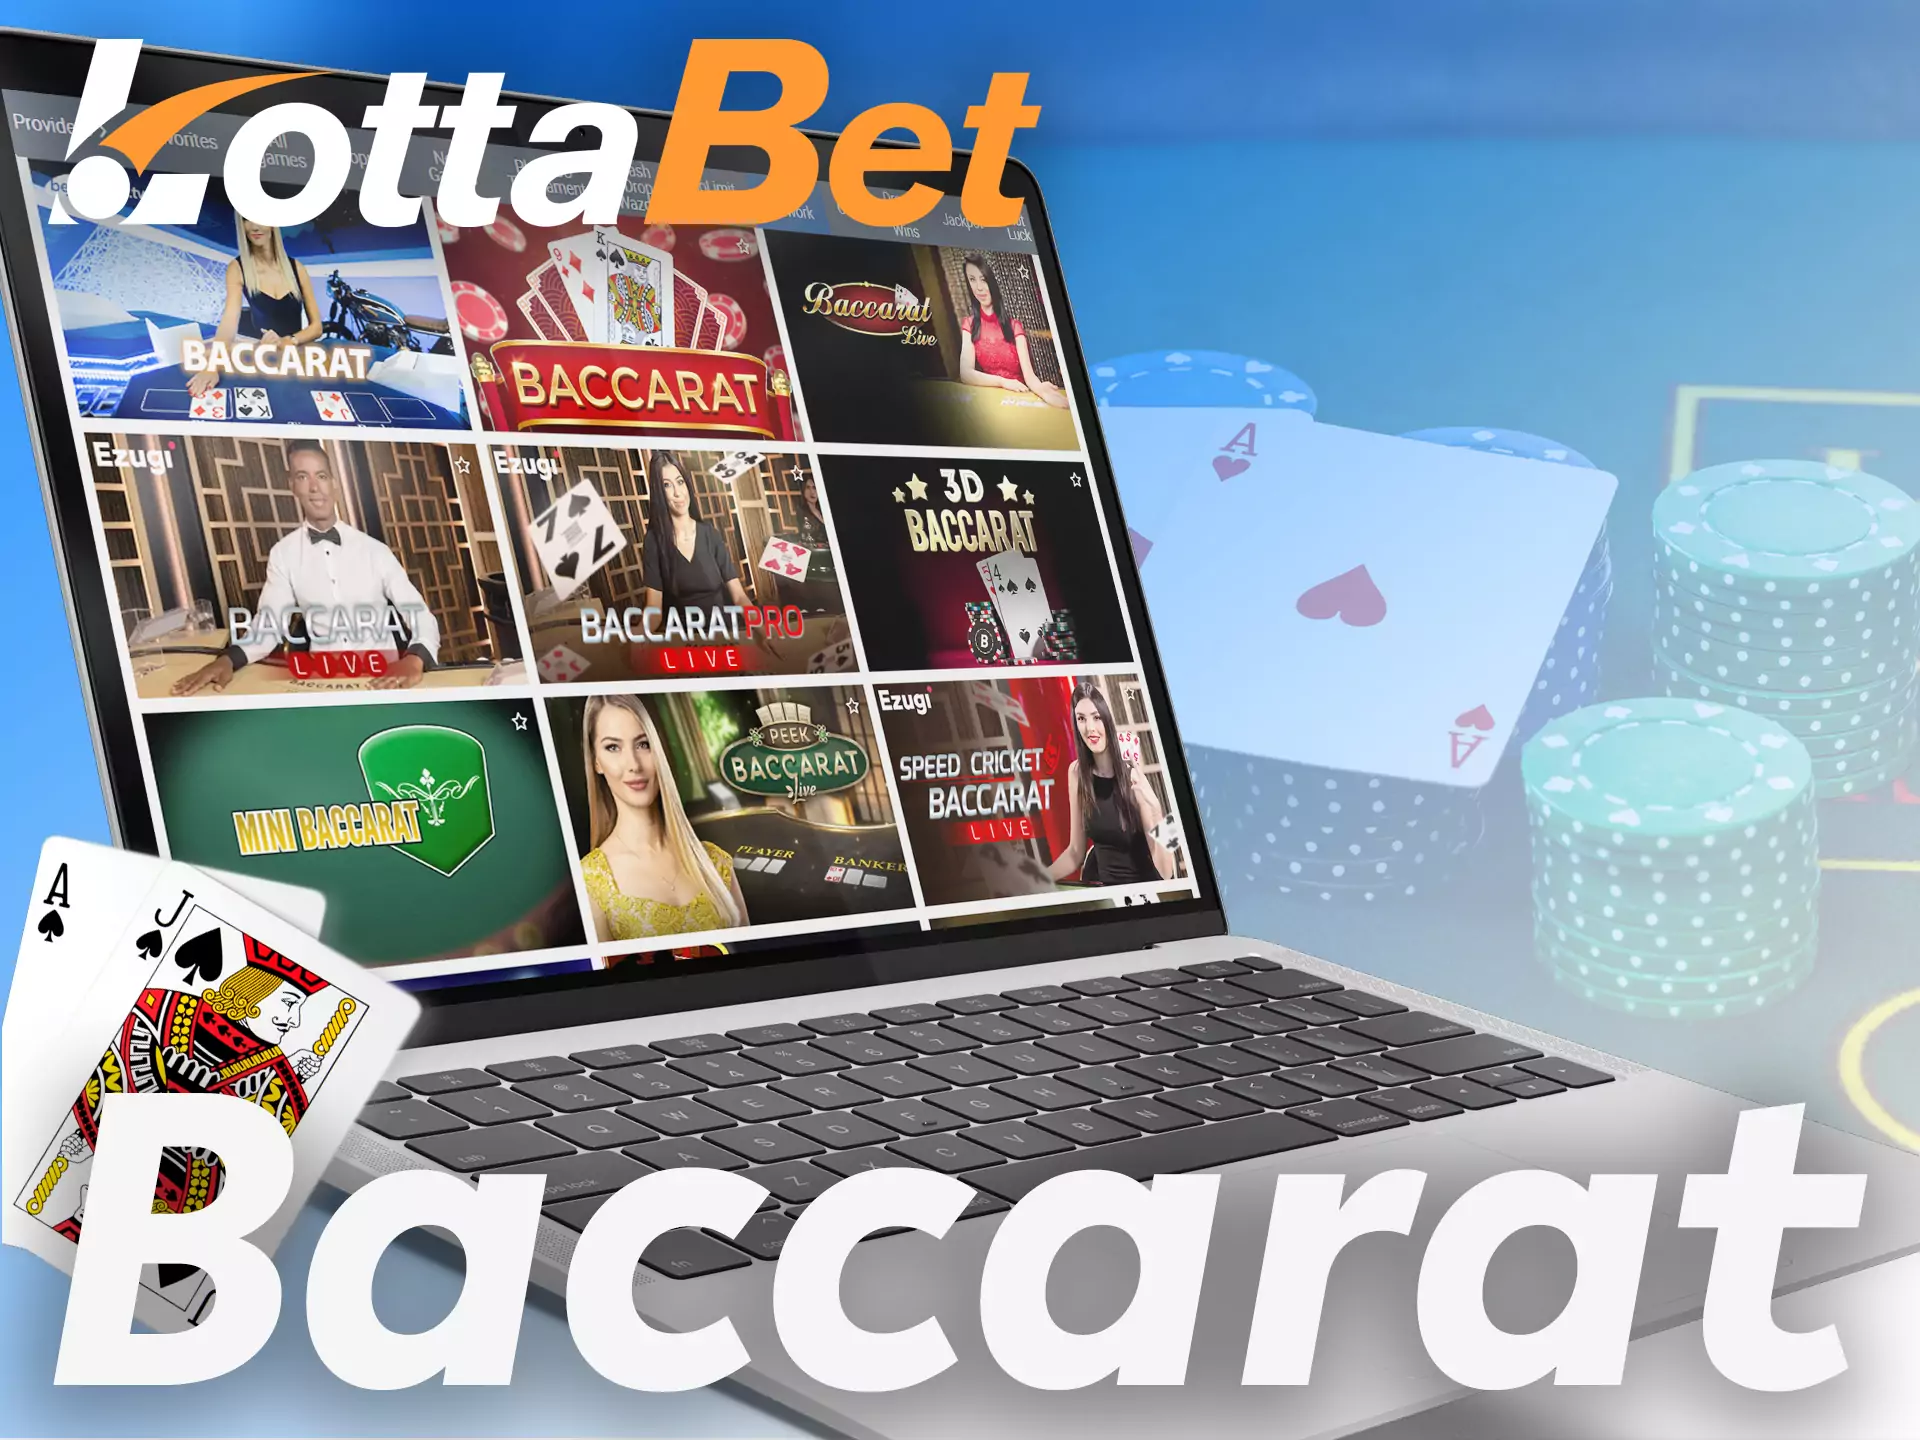 In the Lottabet Casino, you can play classic games like baccarat.